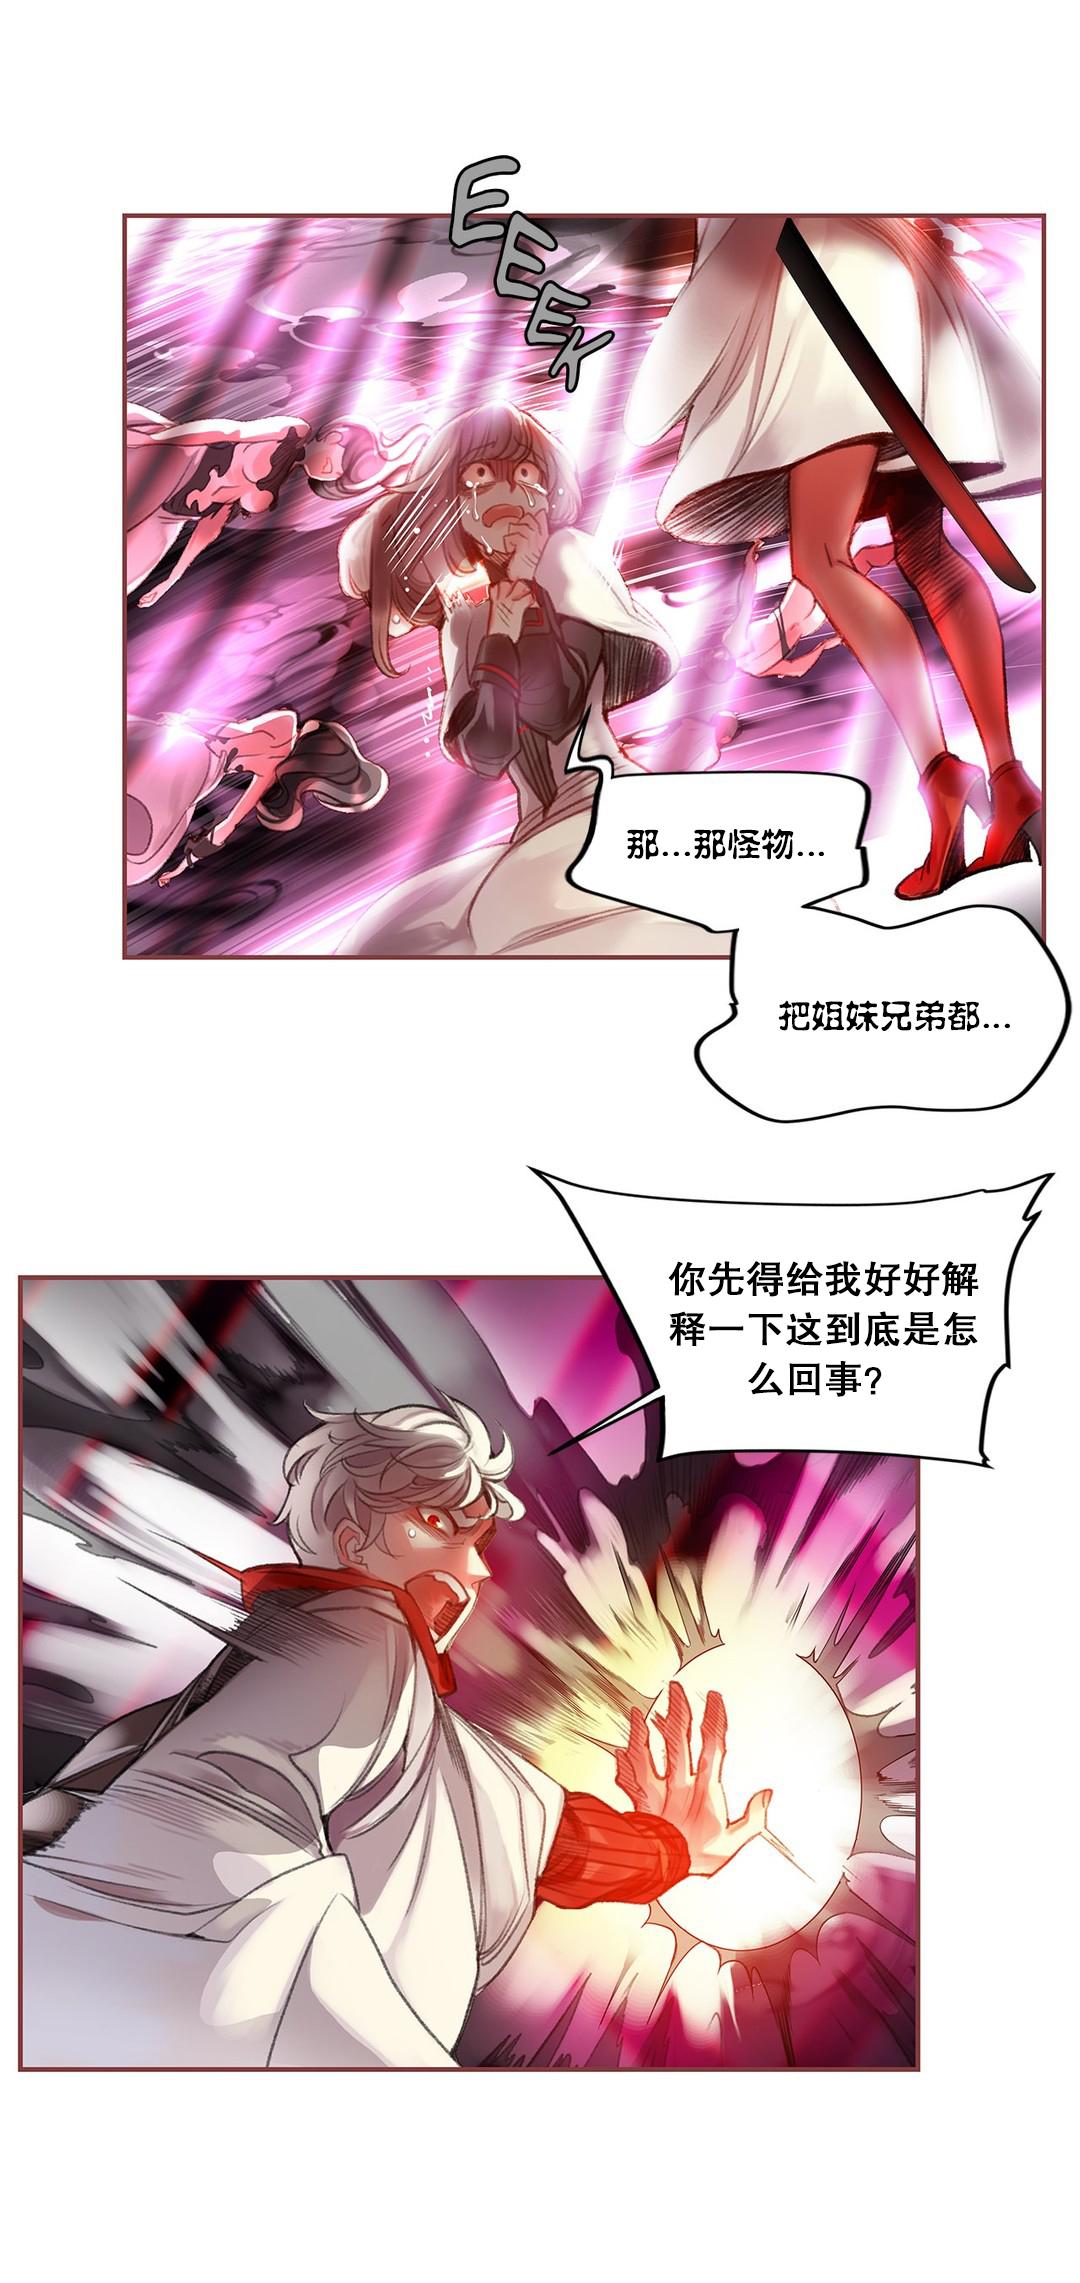 [Juder] Lilith`s Cord (第二季) Ch.61-65 [Chinese] [aaatwist个人汉化] [Ongoing] 22